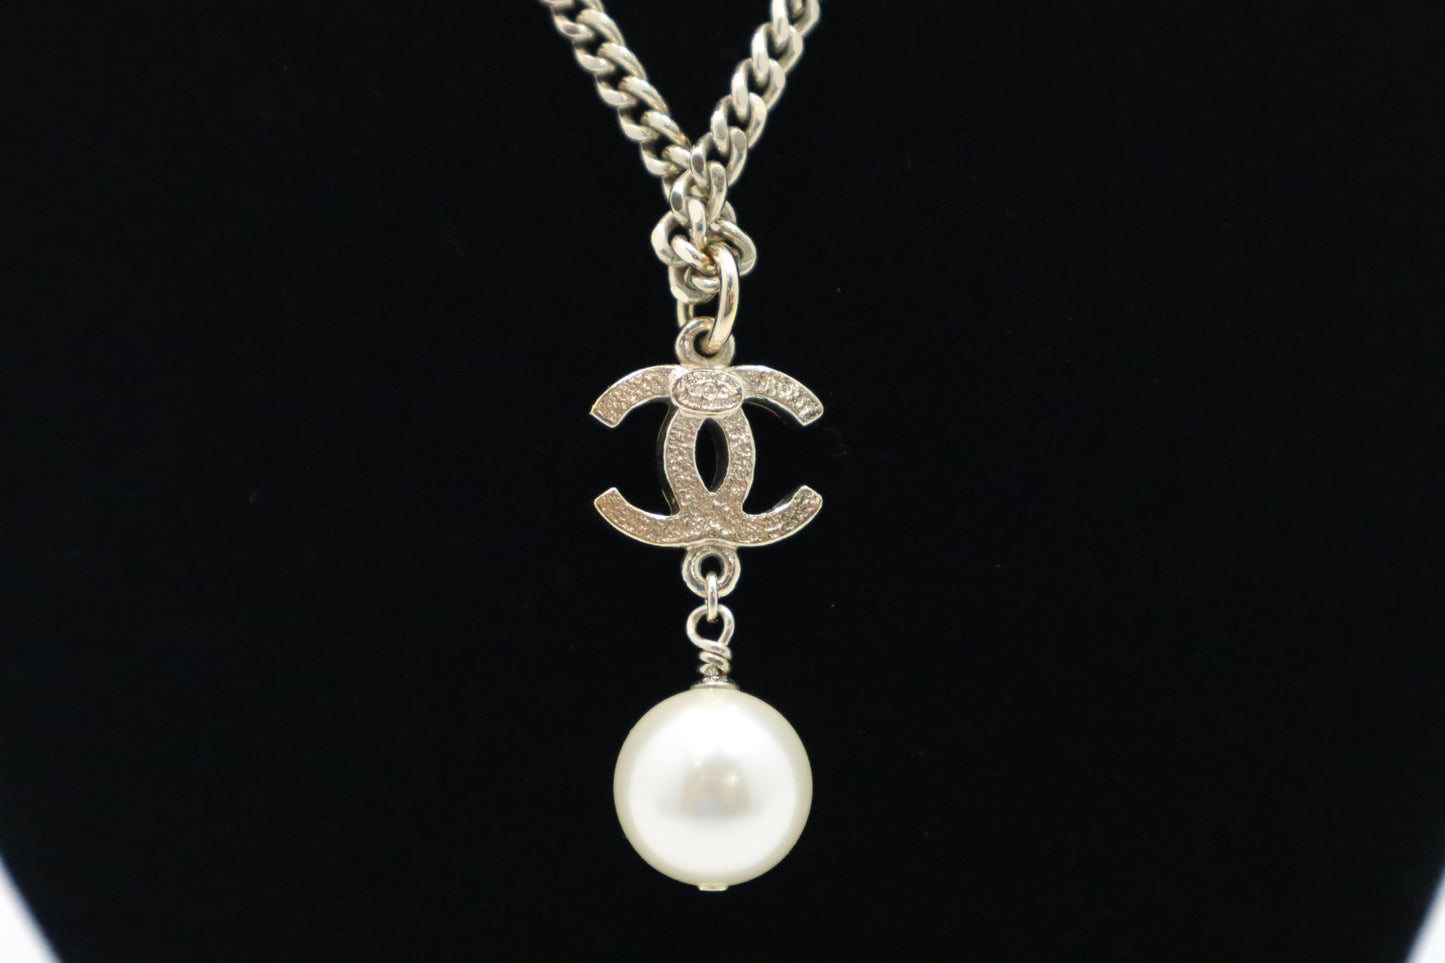 Chanel Necklace in Black and Champagne Gold